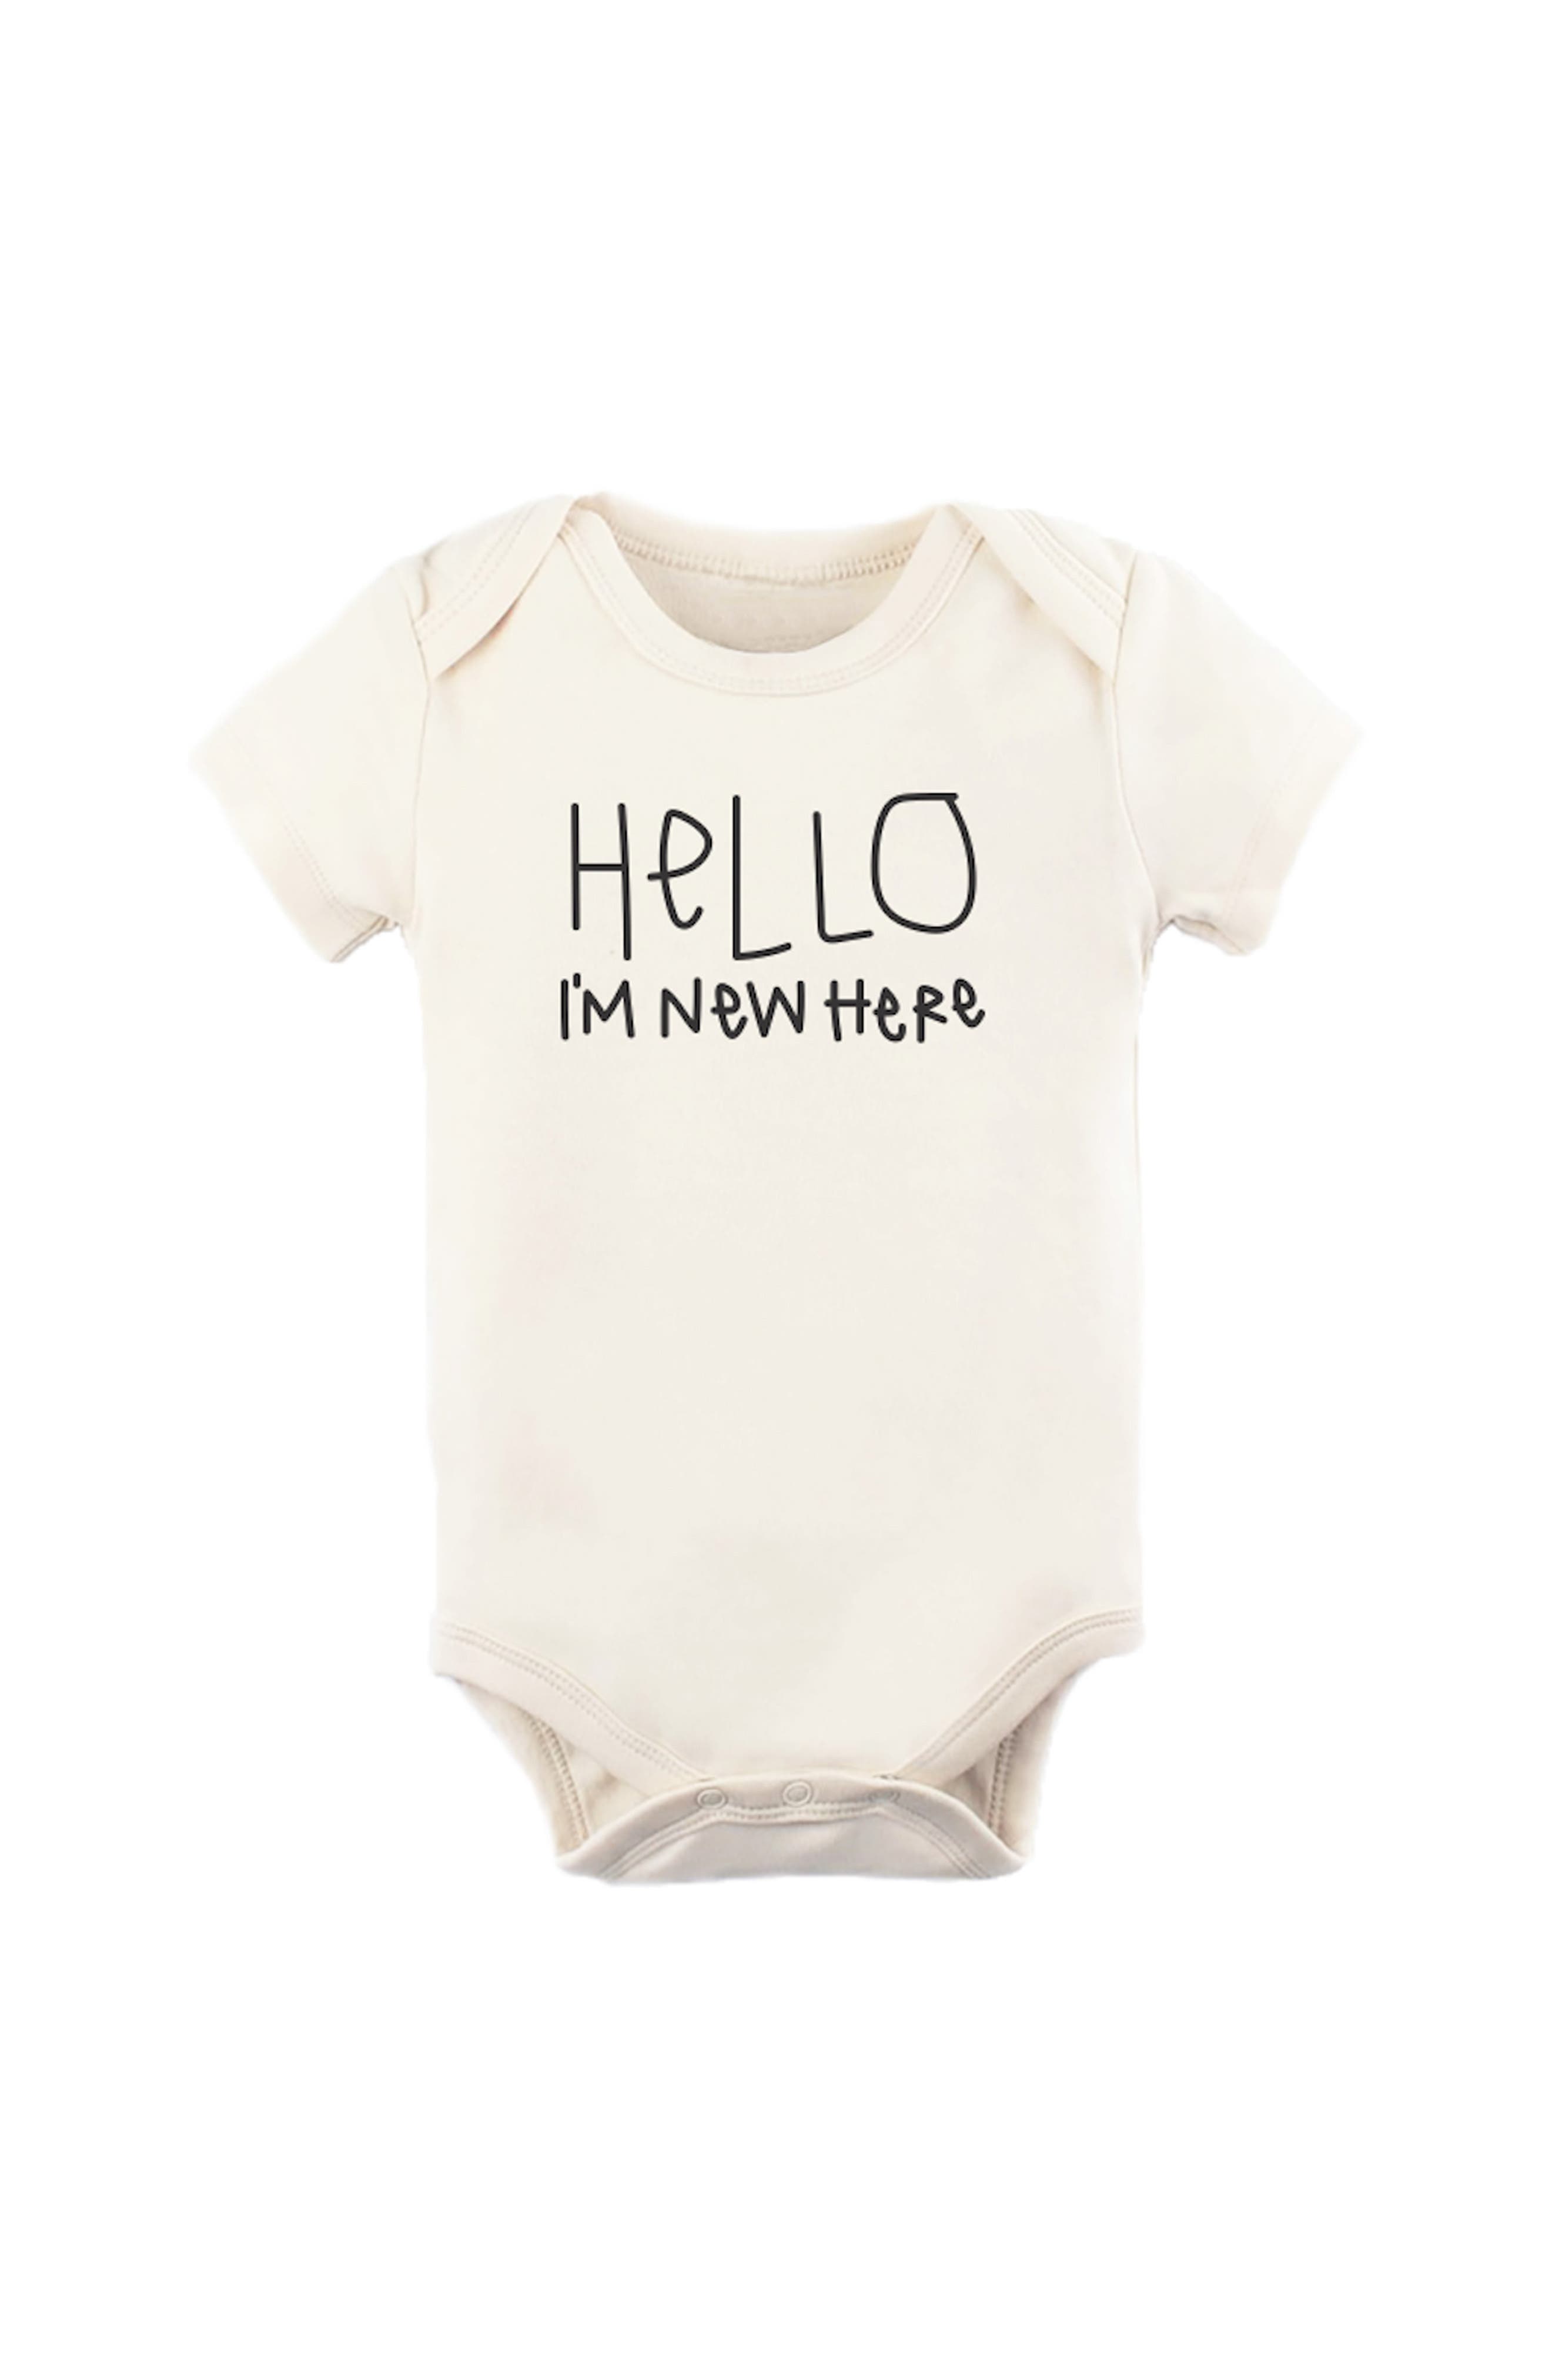 Unisex Baby outfit